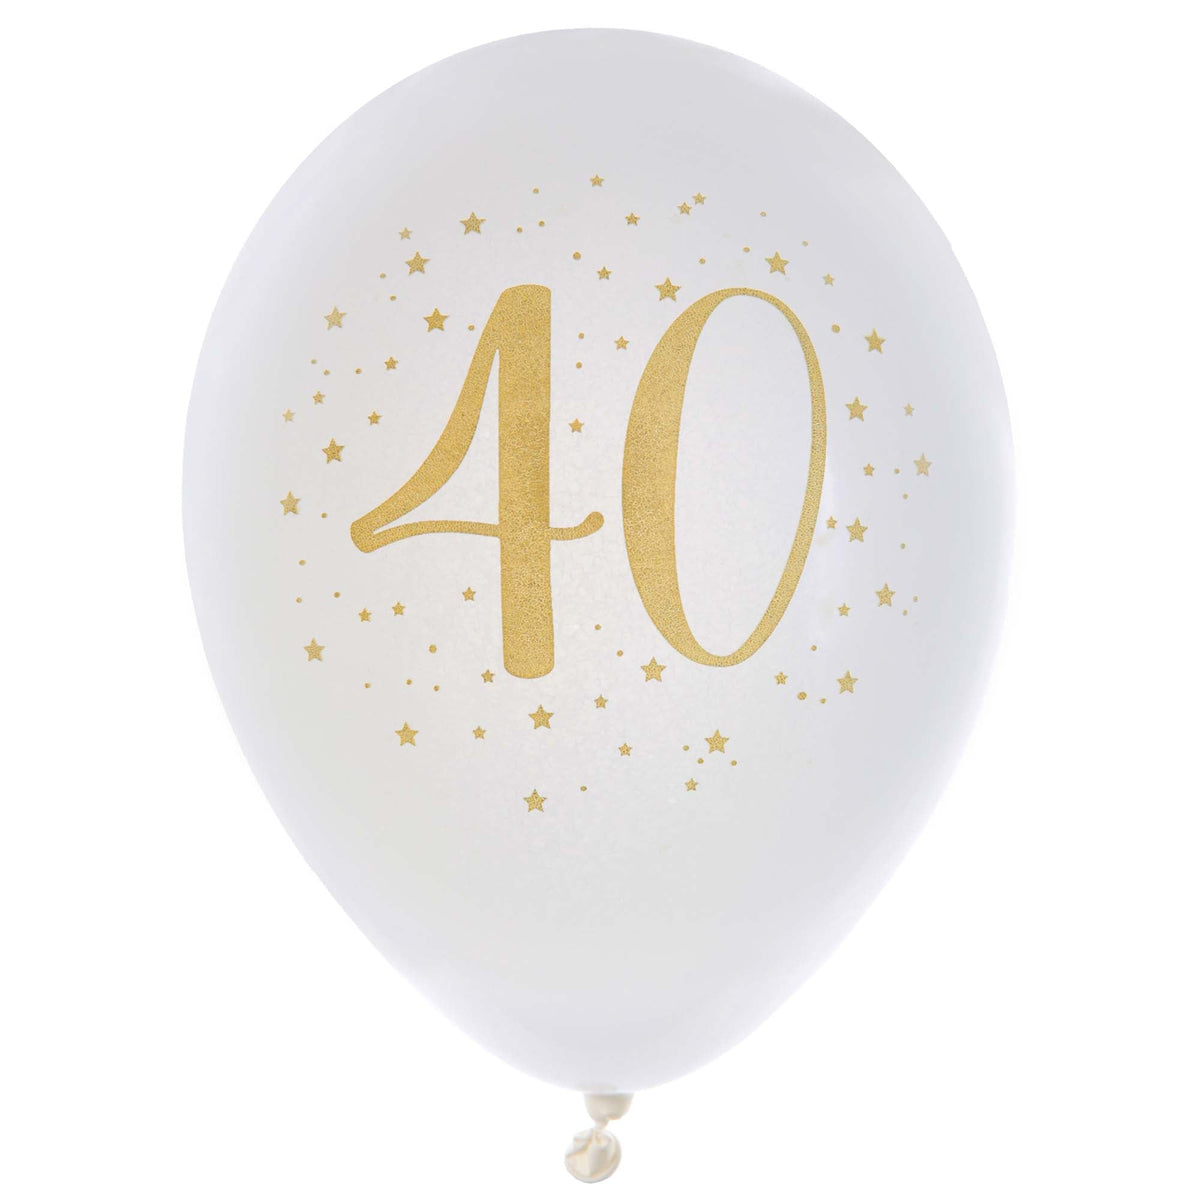 SANTEX Age Specific Birthday White and Gold 40th Birthday Latex Balloons, 12 Inches, 6 Count 3660380050964